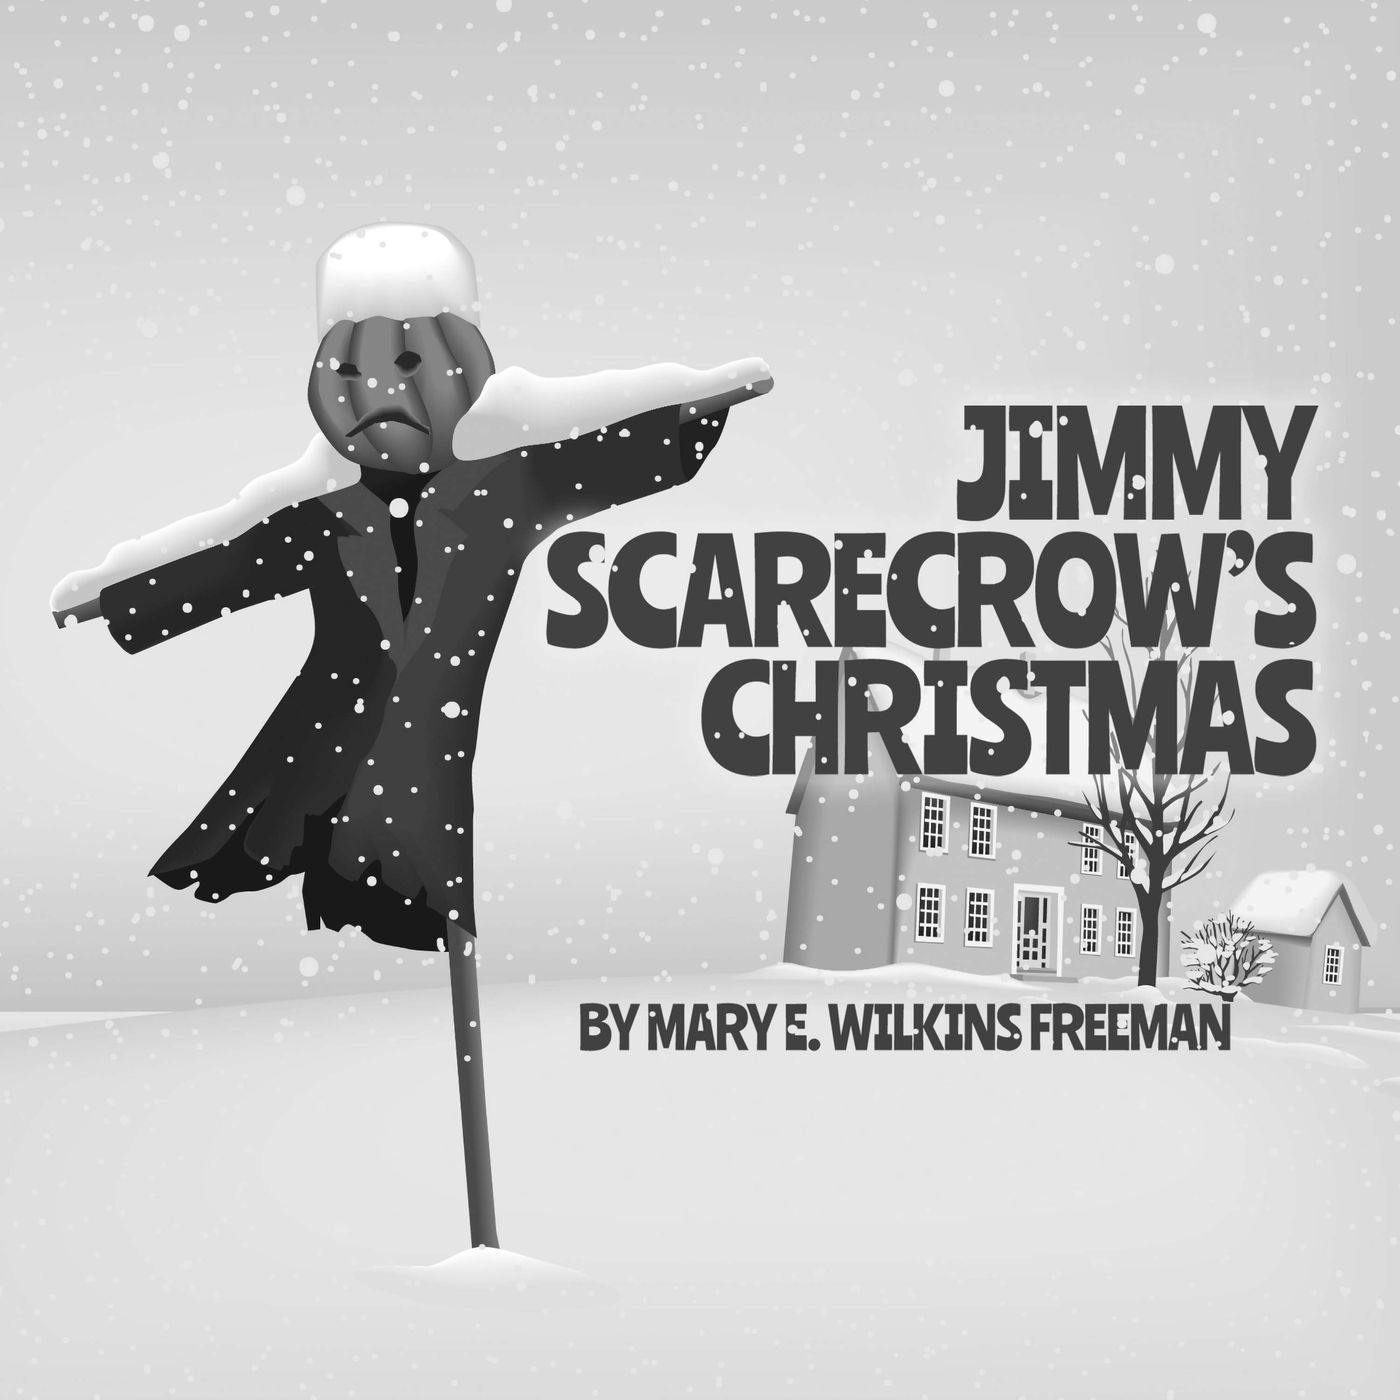 Jimmy Scarecrow's Christmas by Mary E. Wilkins Freeman